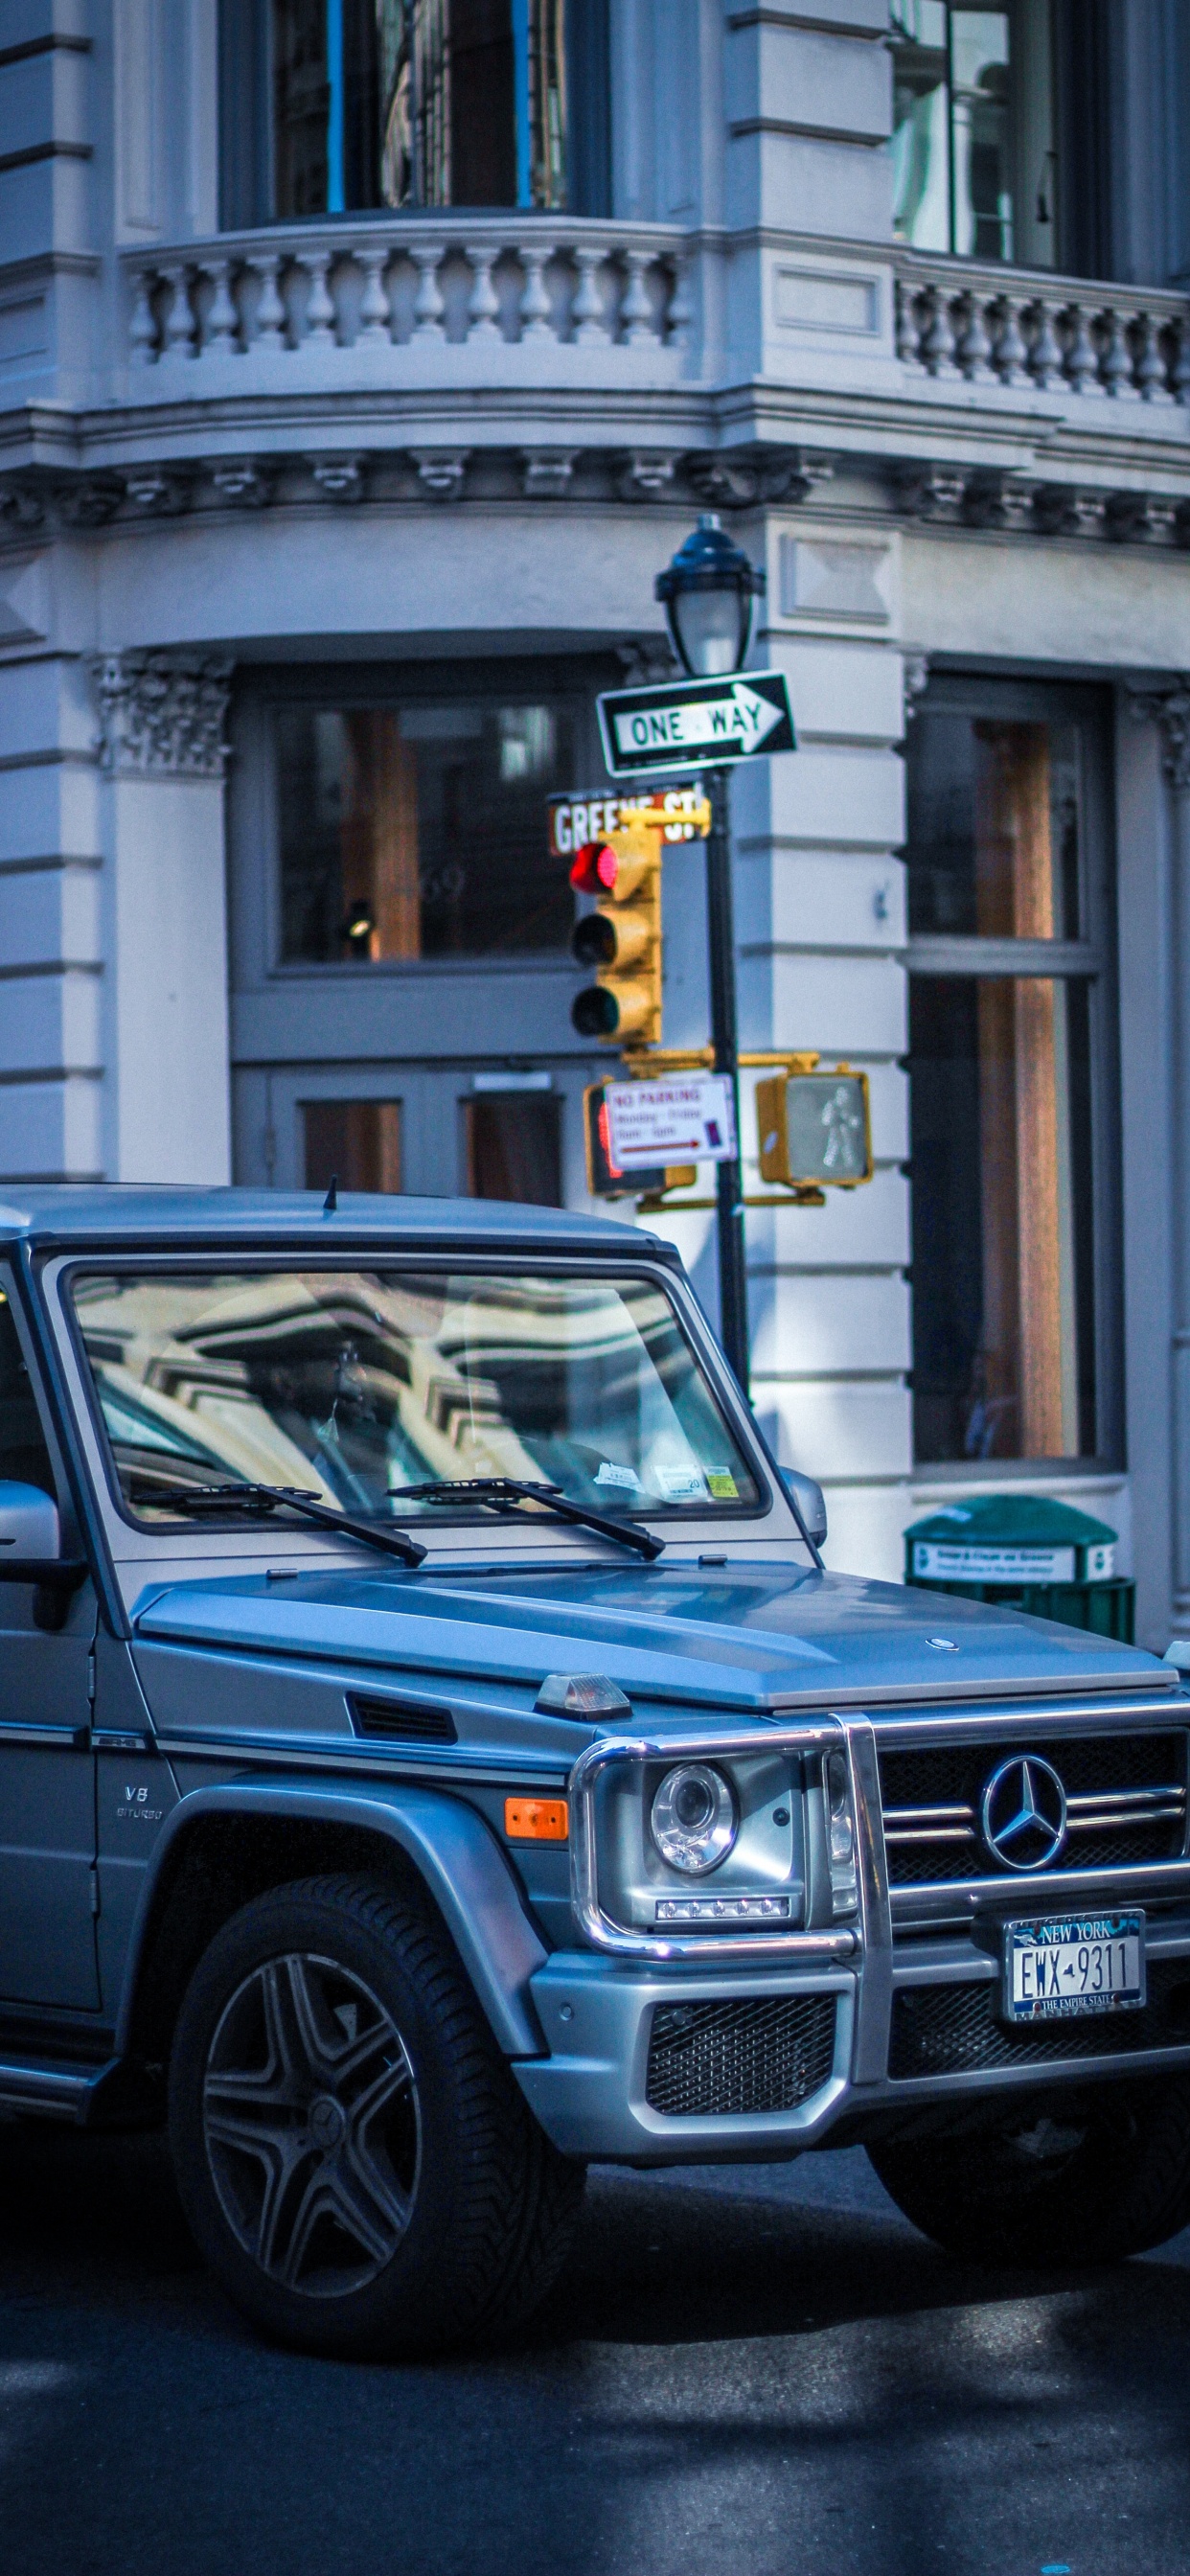 Blue Mercedes Benz g Class Suv Parked Beside White Concrete Building During Daytime. Wallpaper in 1242x2688 Resolution